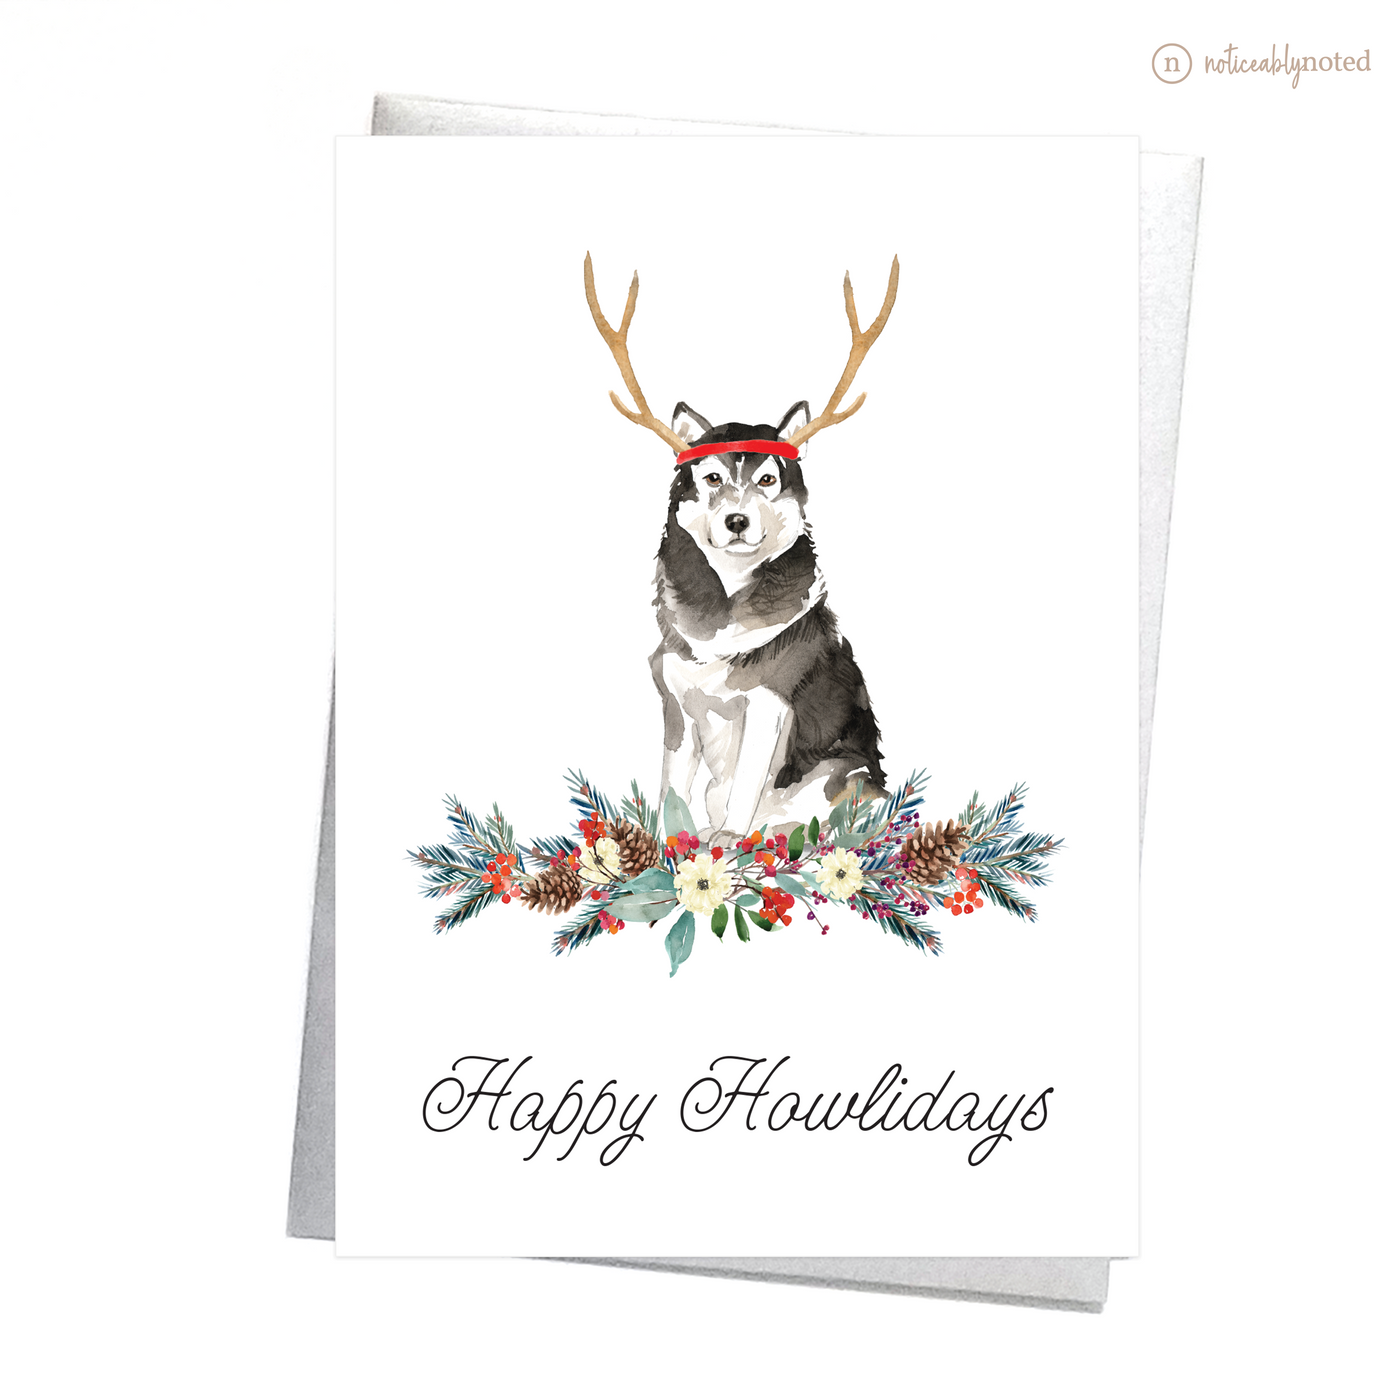 Malamute Dog Christmas Card | Noticeably Noted